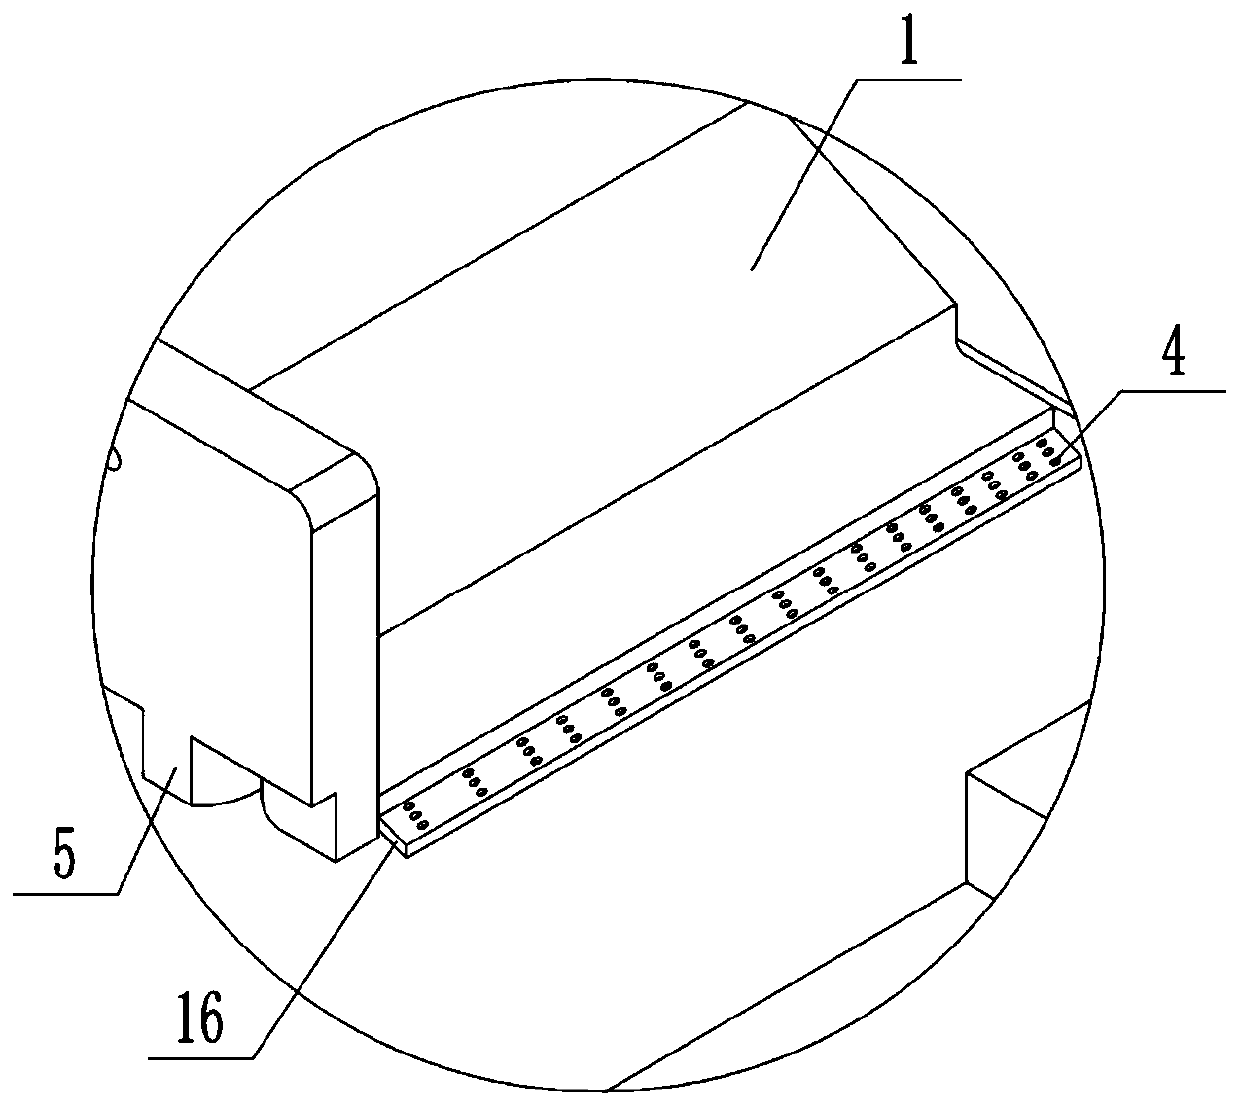 Flow-guiding anti-splashing mechanism for preventing cooling water from splashing out of water tank